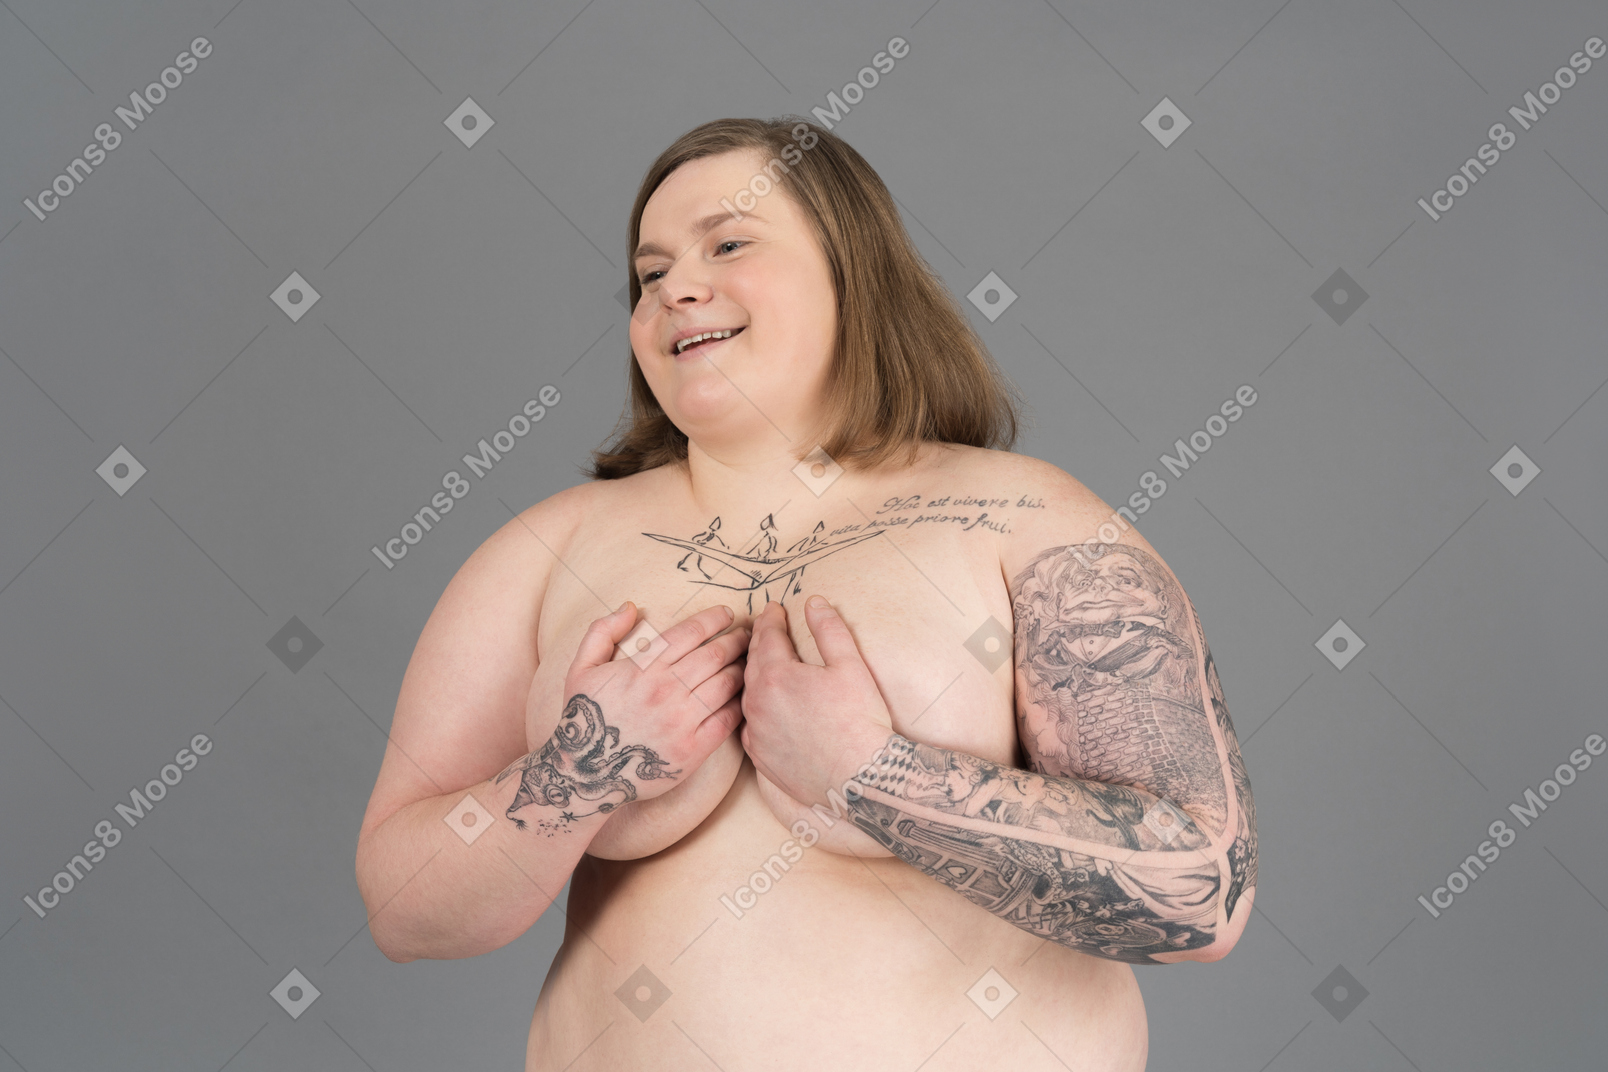 Plump woman holding her breasts